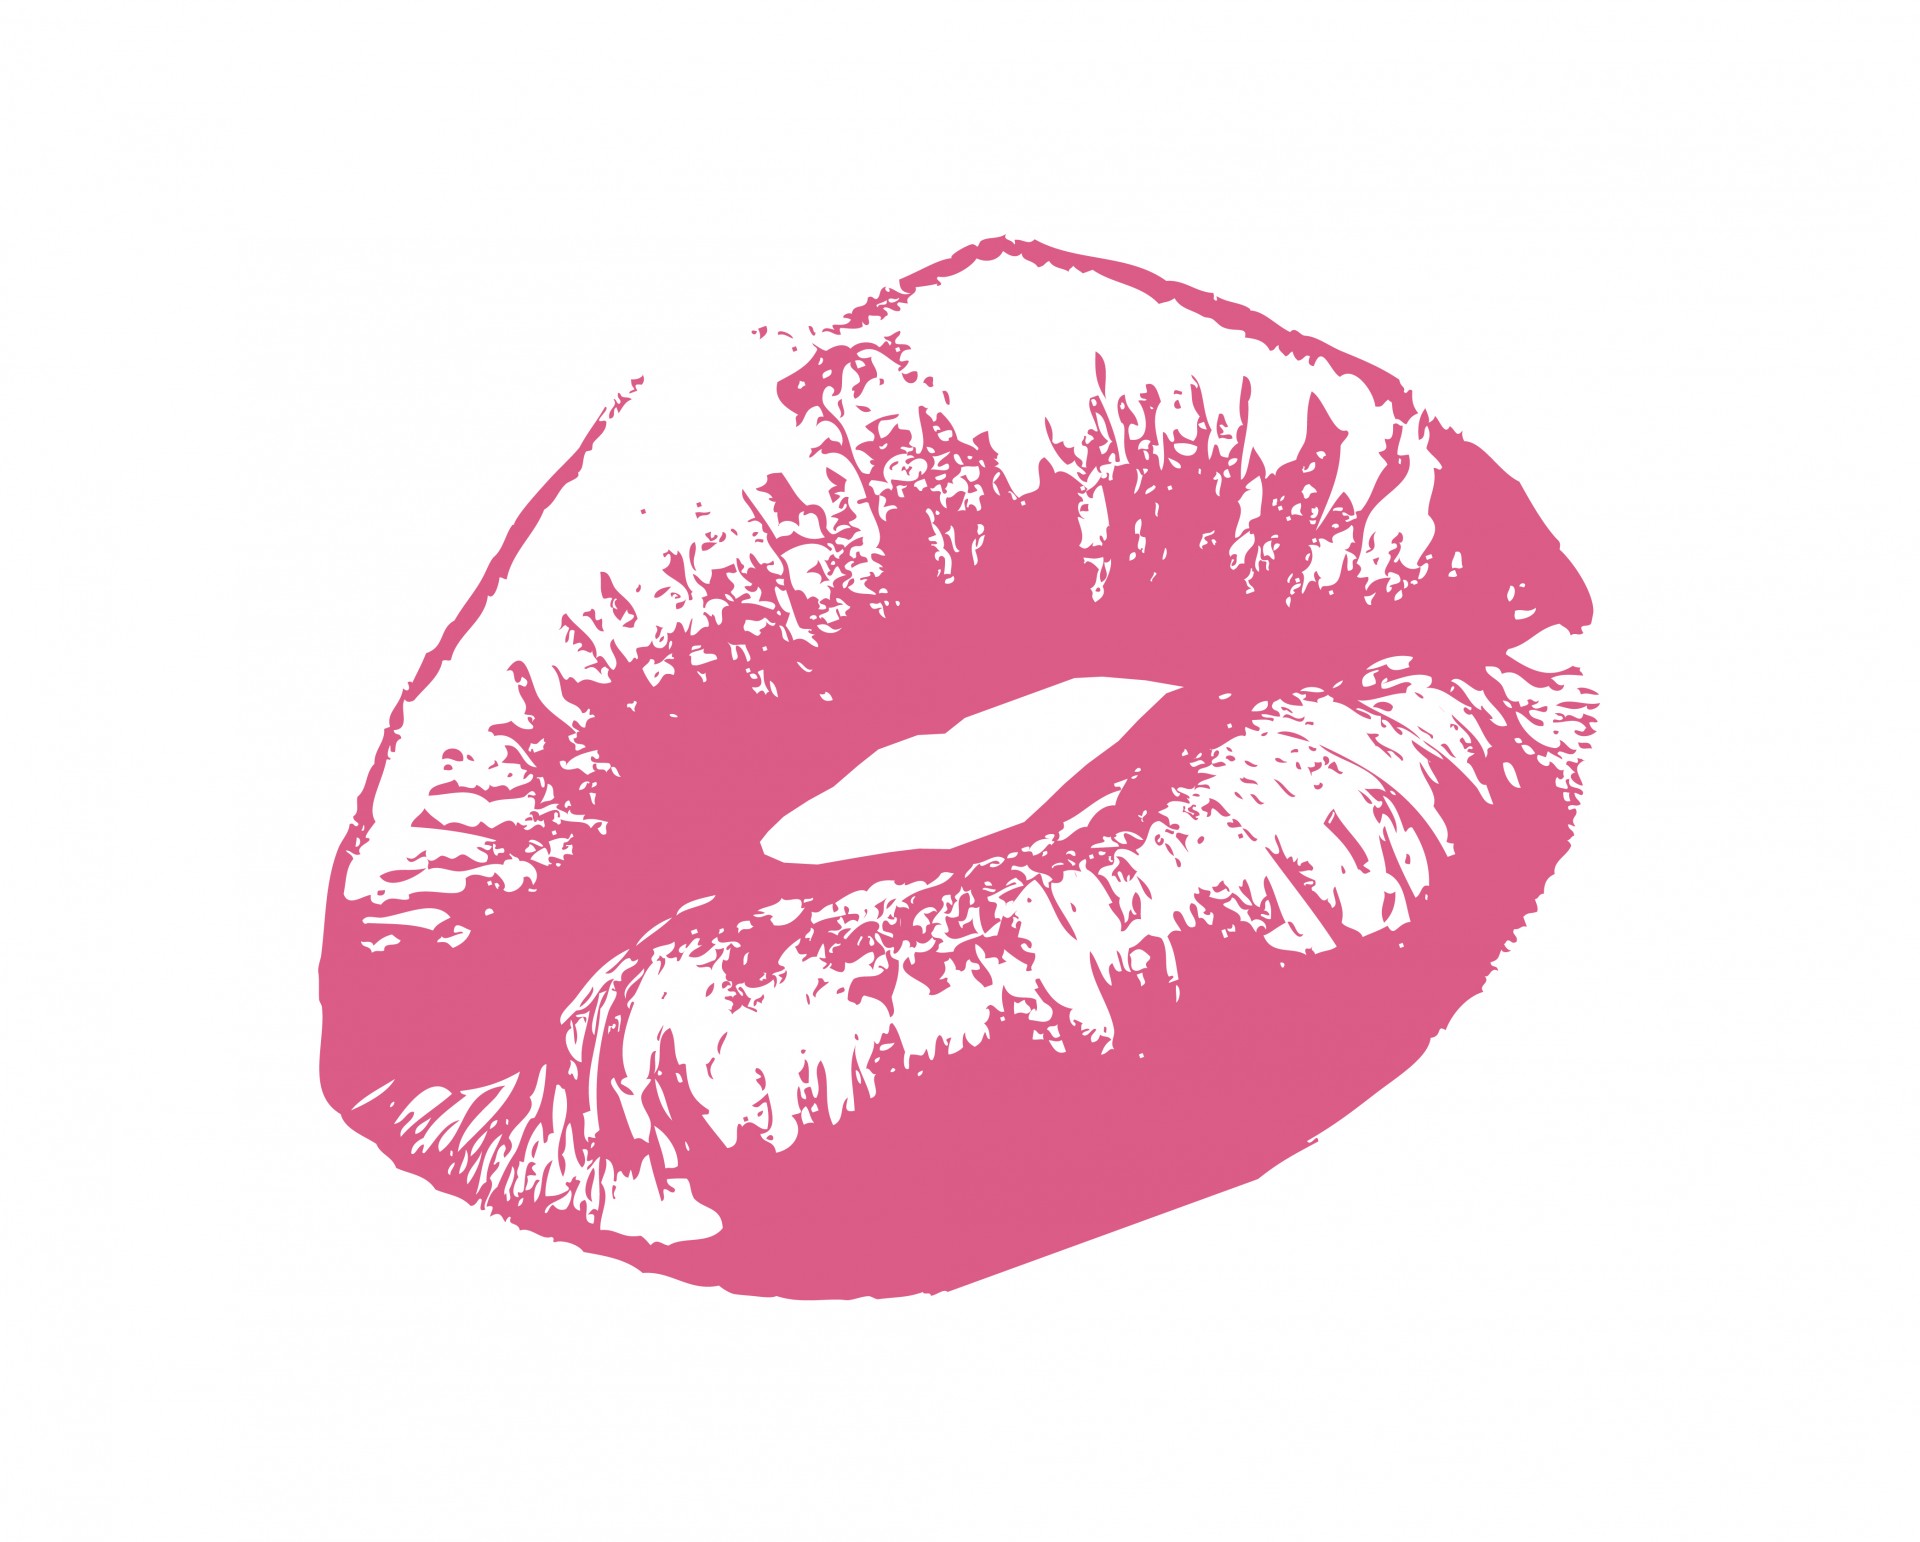 lips clipart woman's